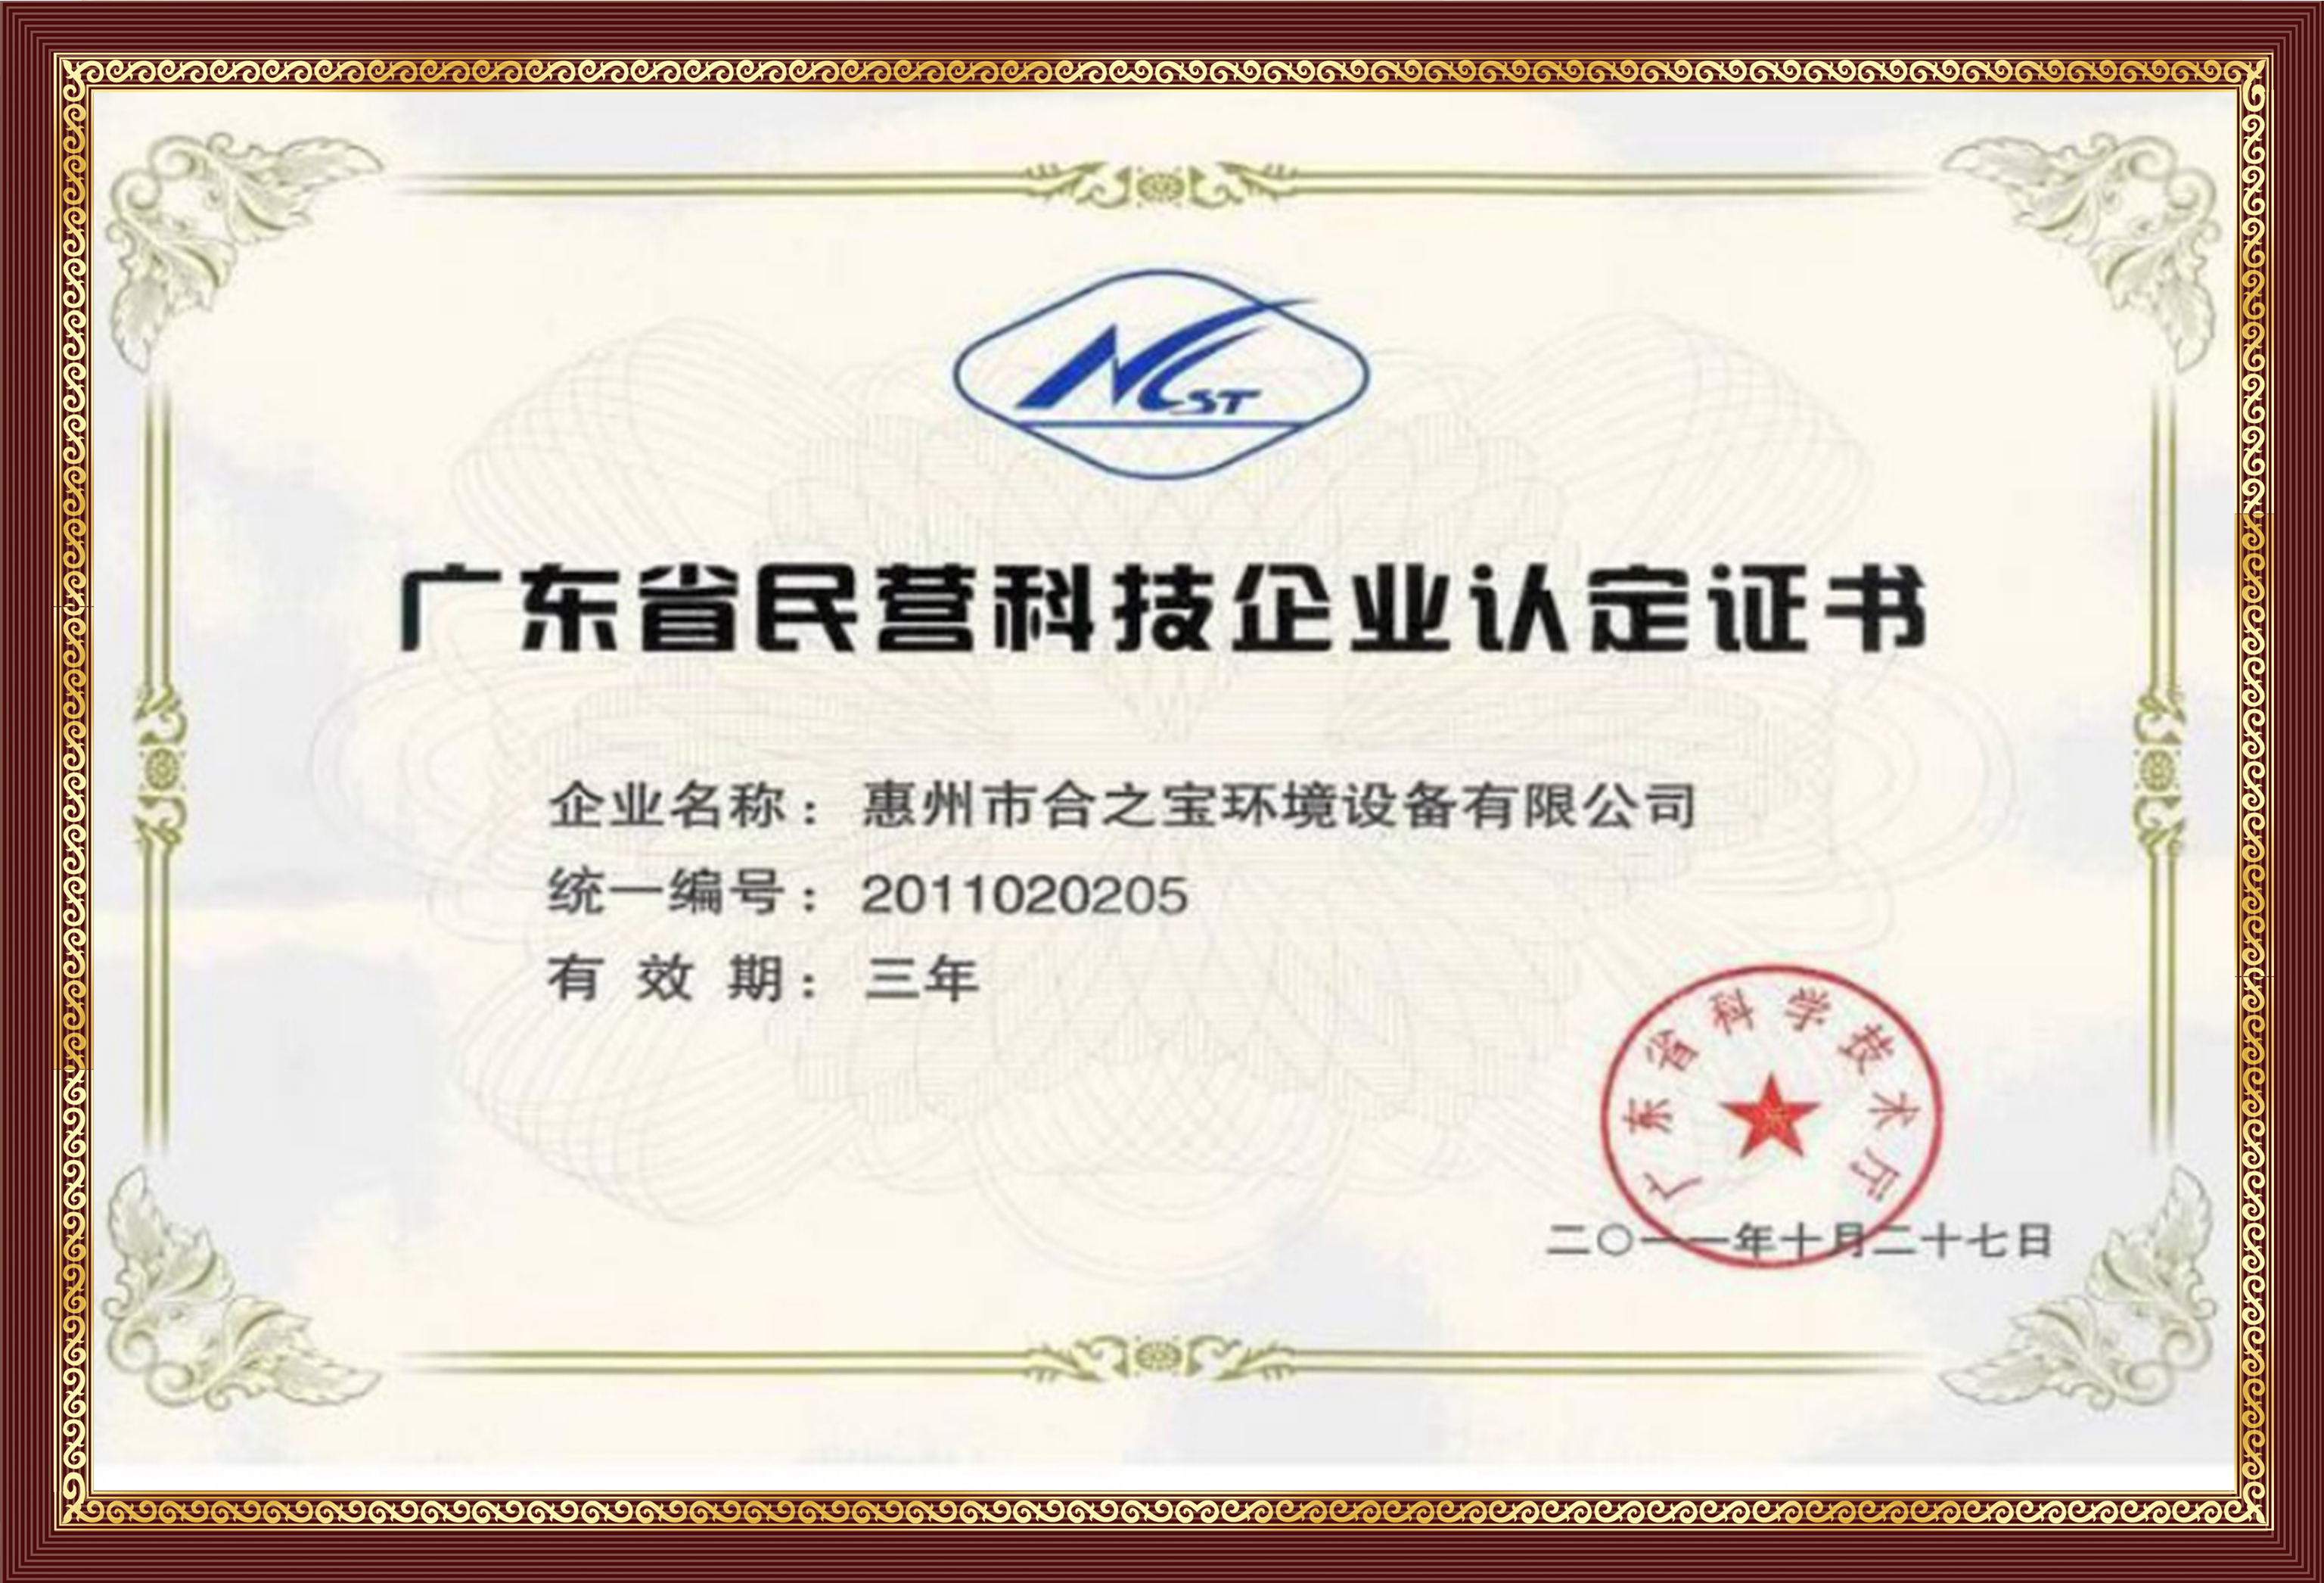 Certificate of Provincial Private Technology Enterprises of Guangdong